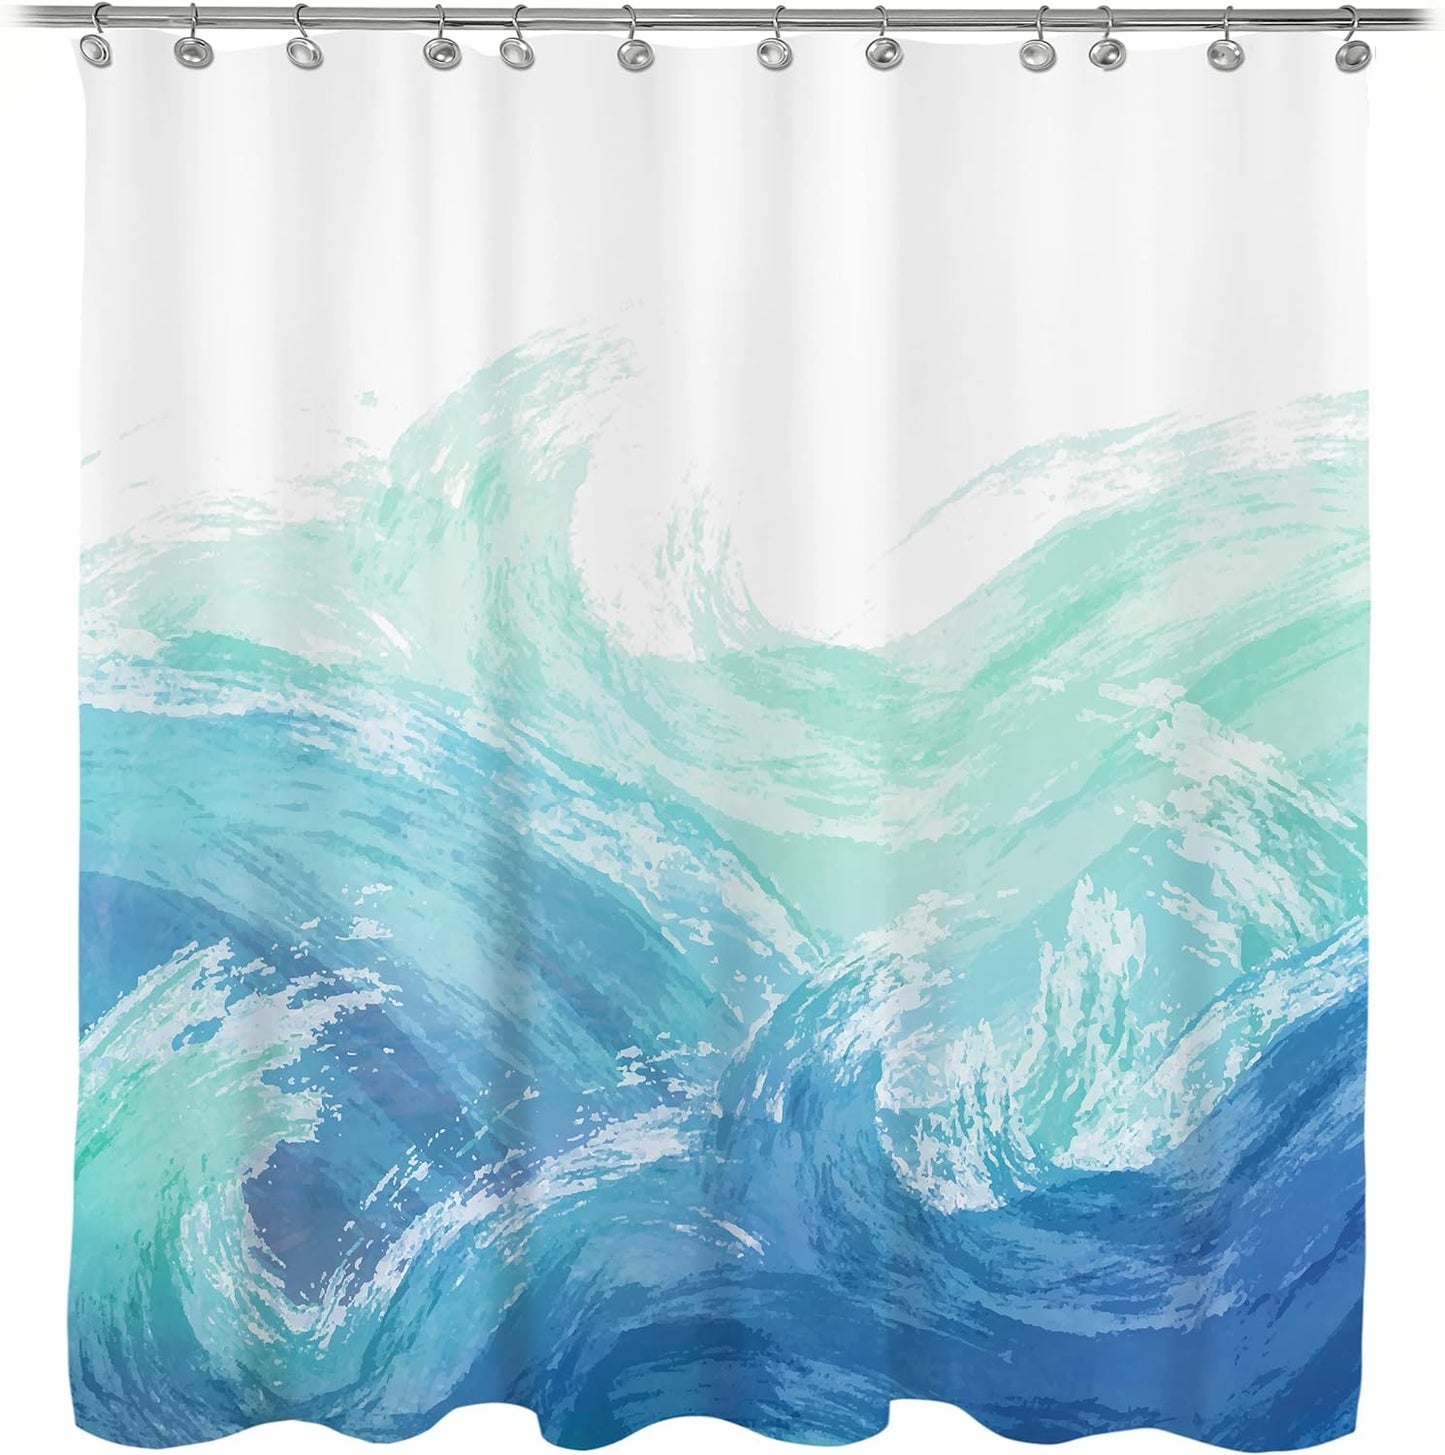 Wave Shower Curtain, Ombre Blue and Green Ocean Theme Shower Curtain for Bathroom Modern Decor Waterproof Tapestry, 71x71 Inch